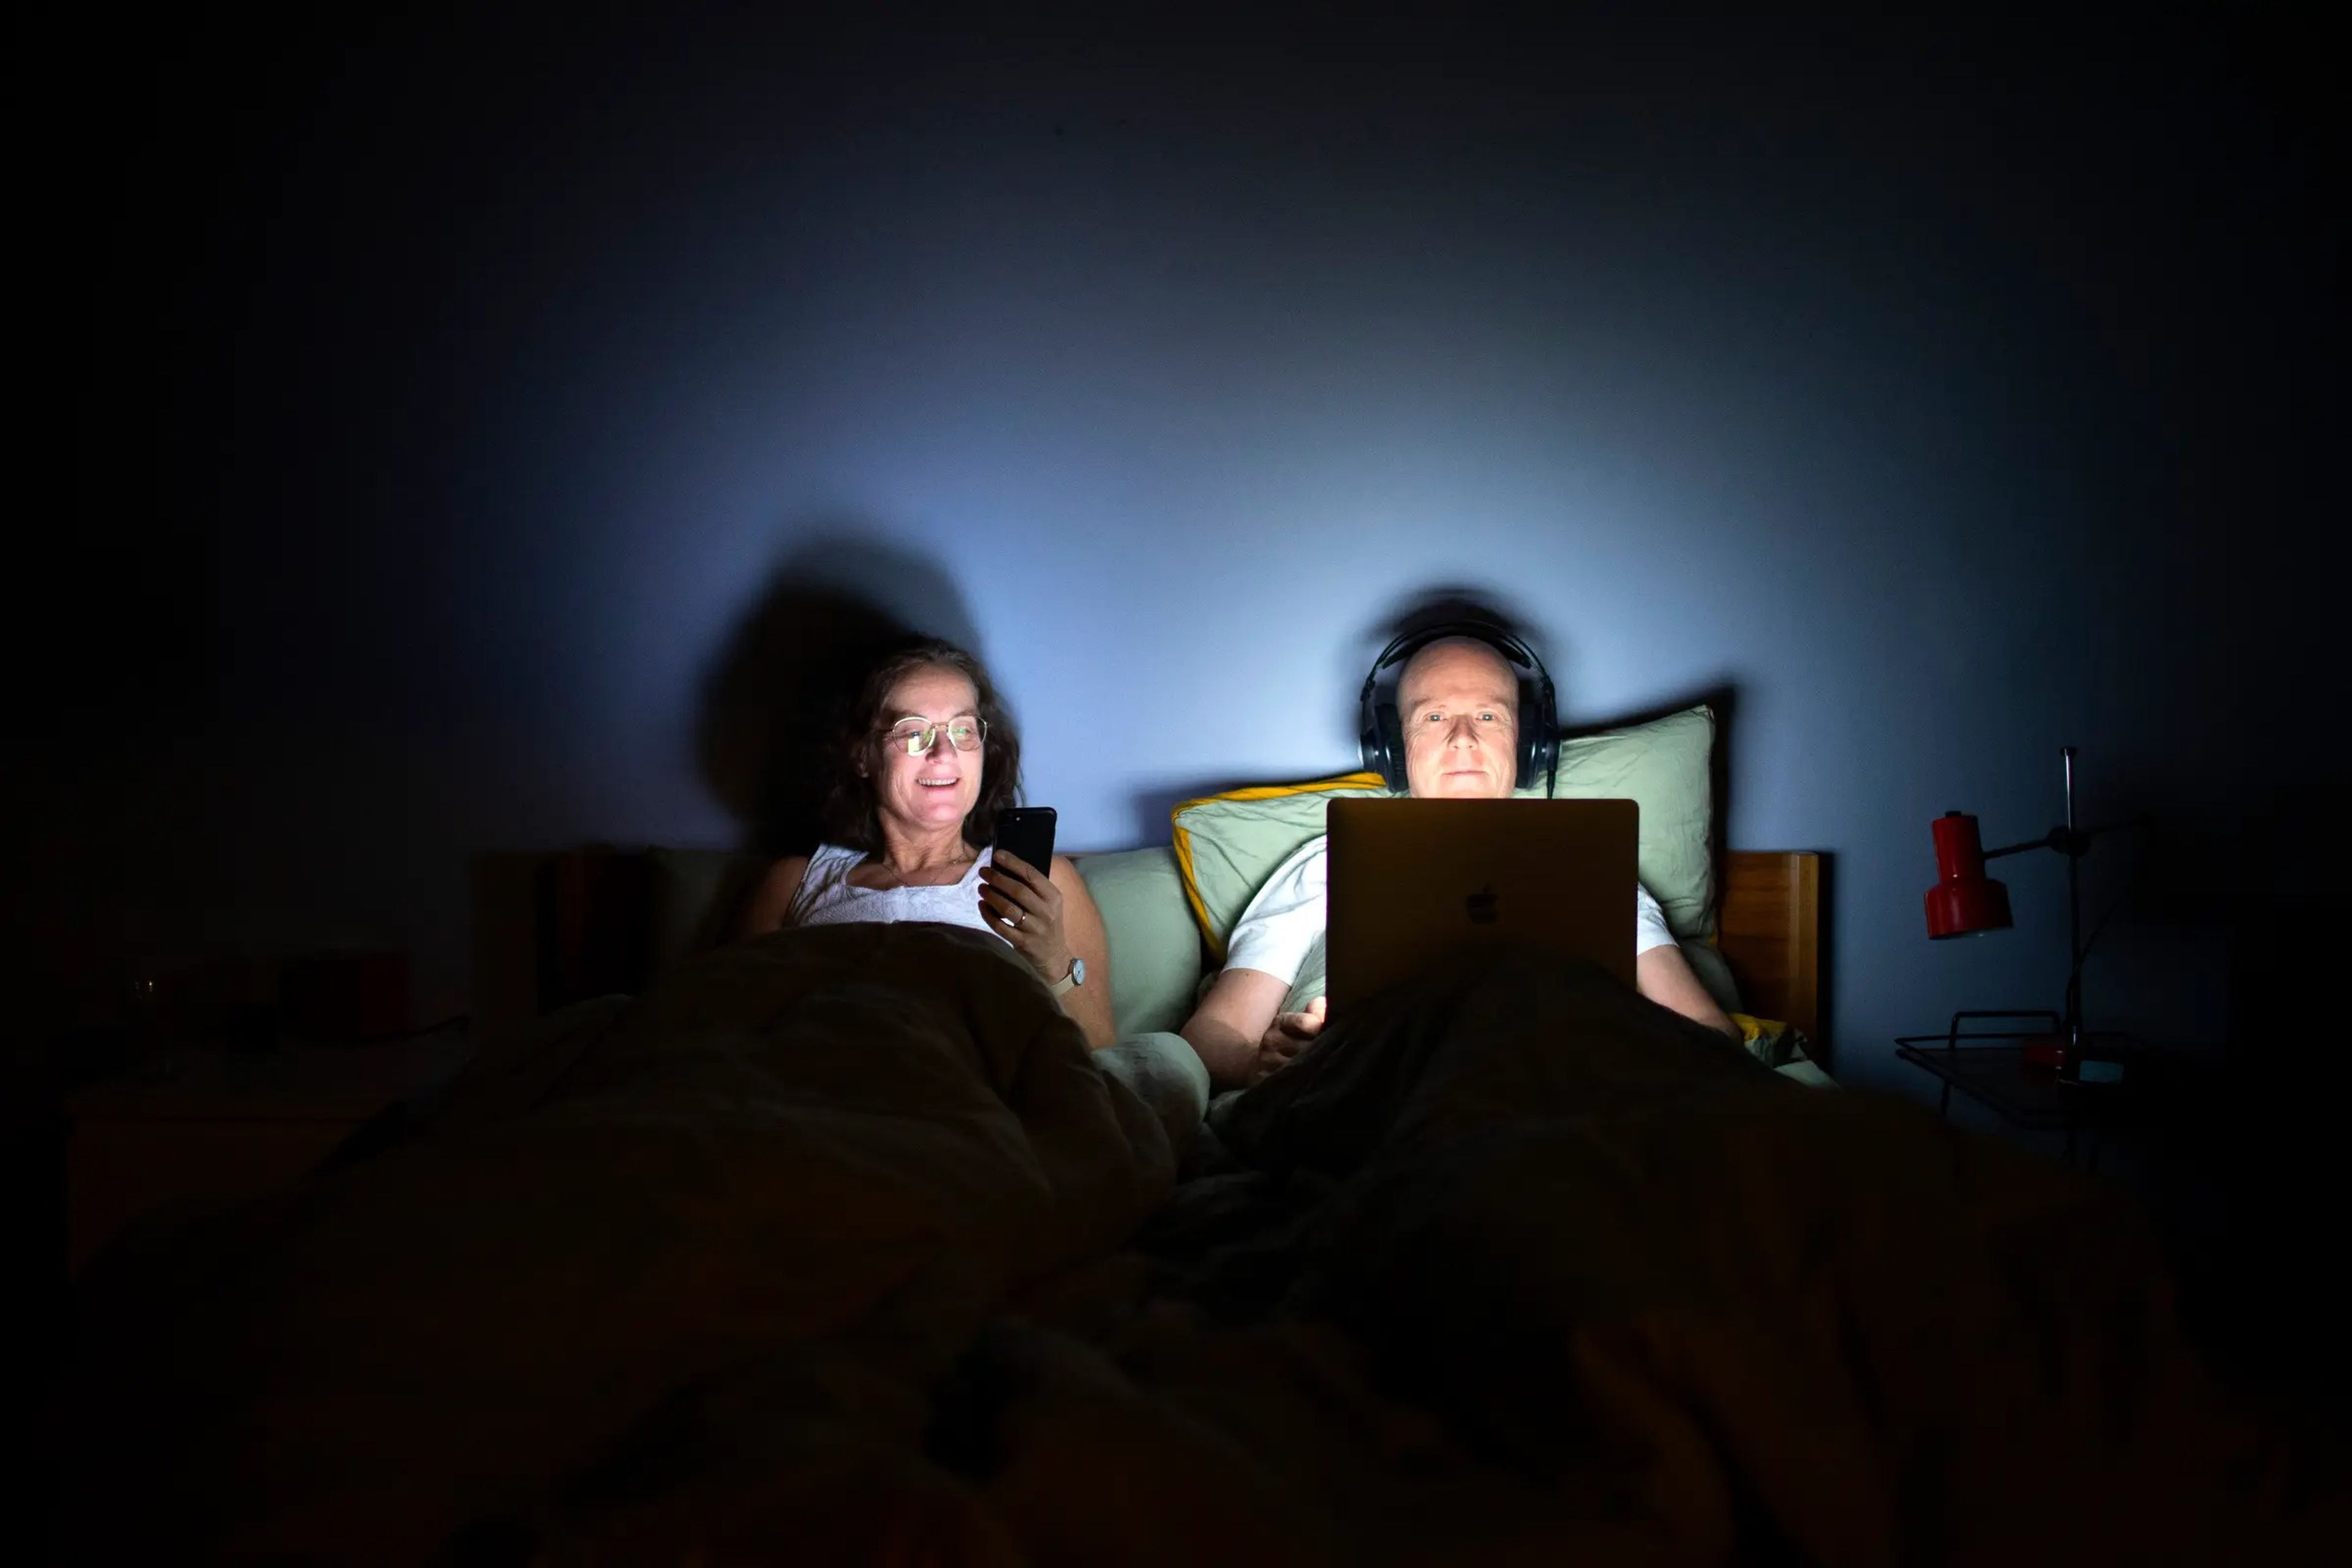 A woman looks at her phone, and a man watches his laptop in bed at night.